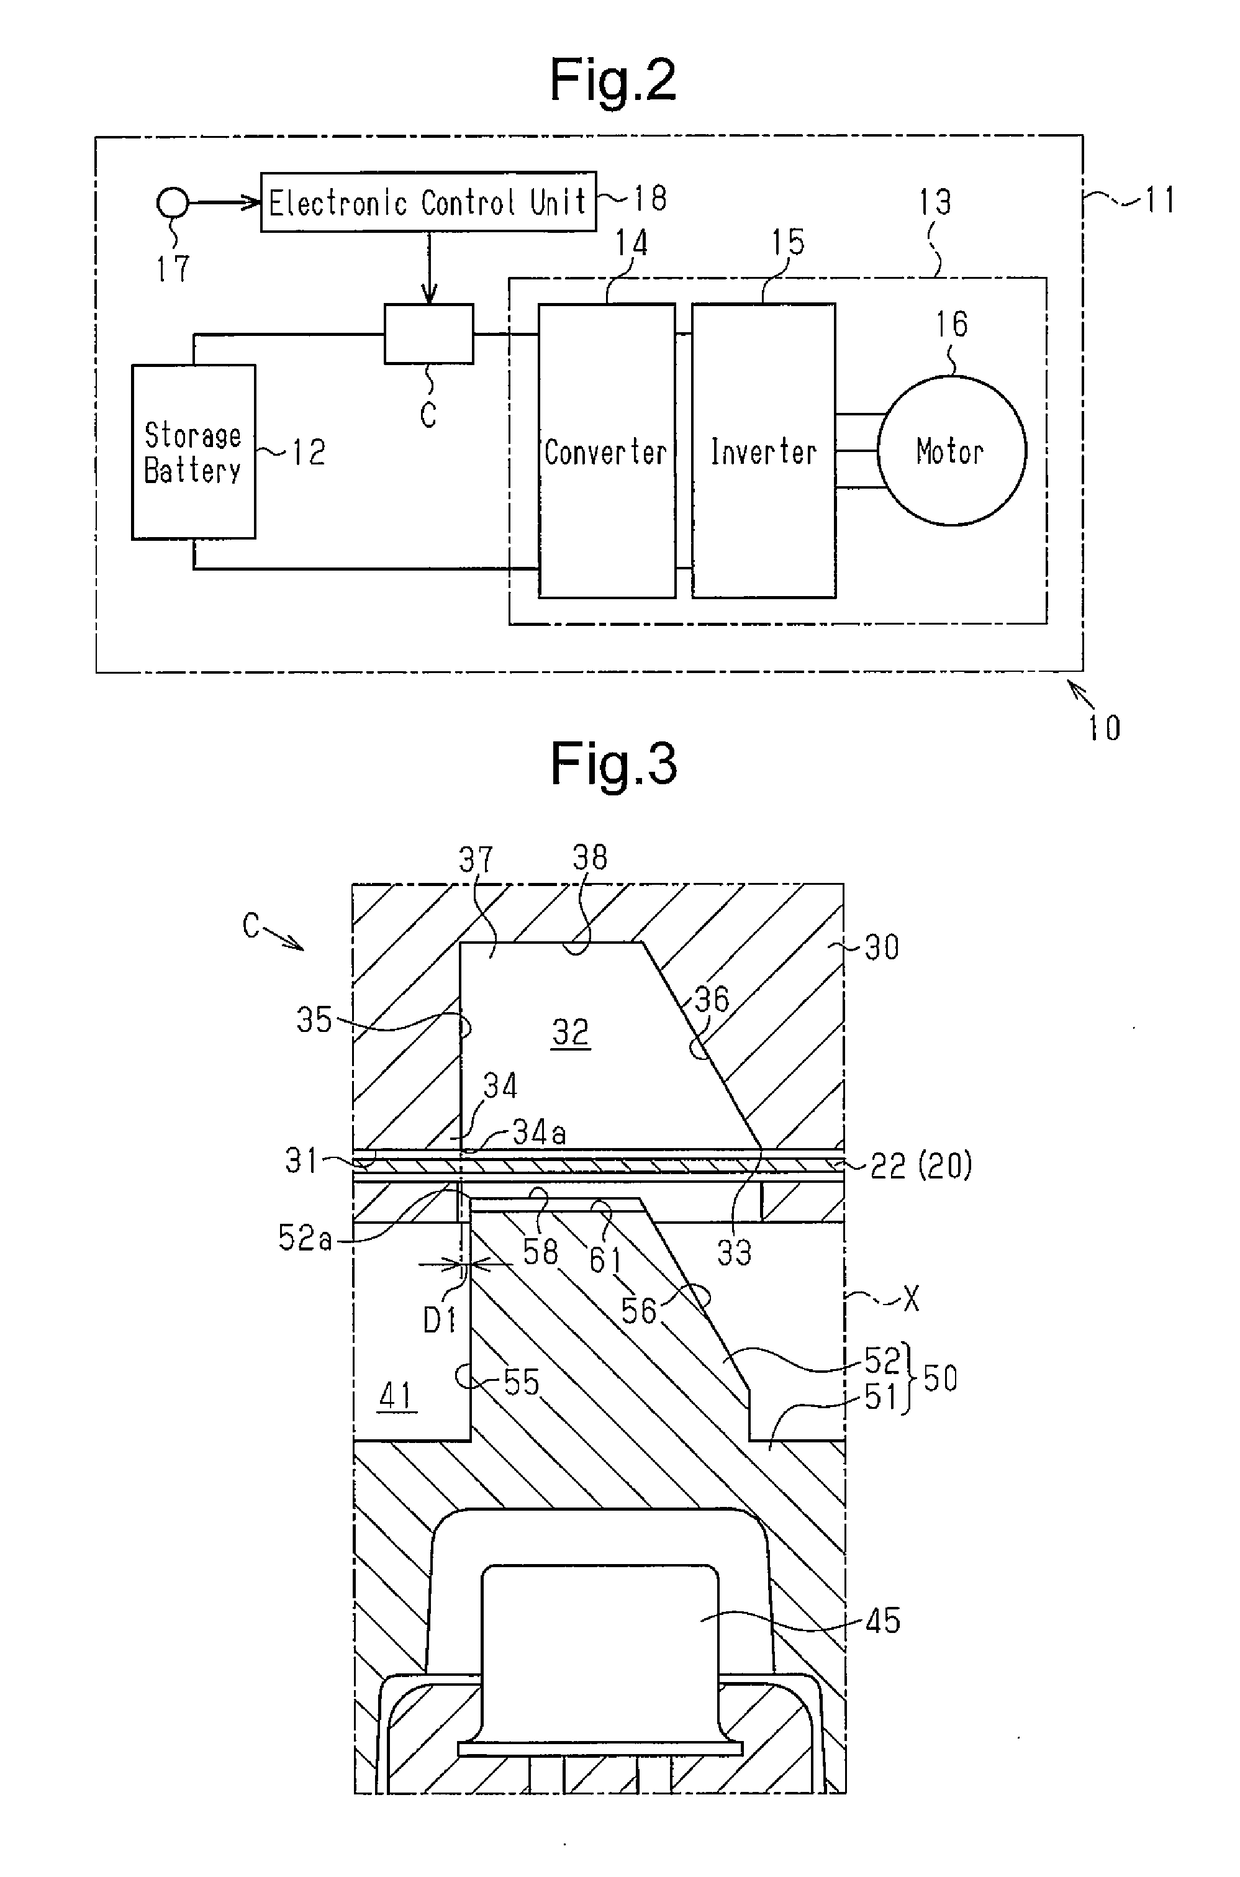 Conduction breaking device